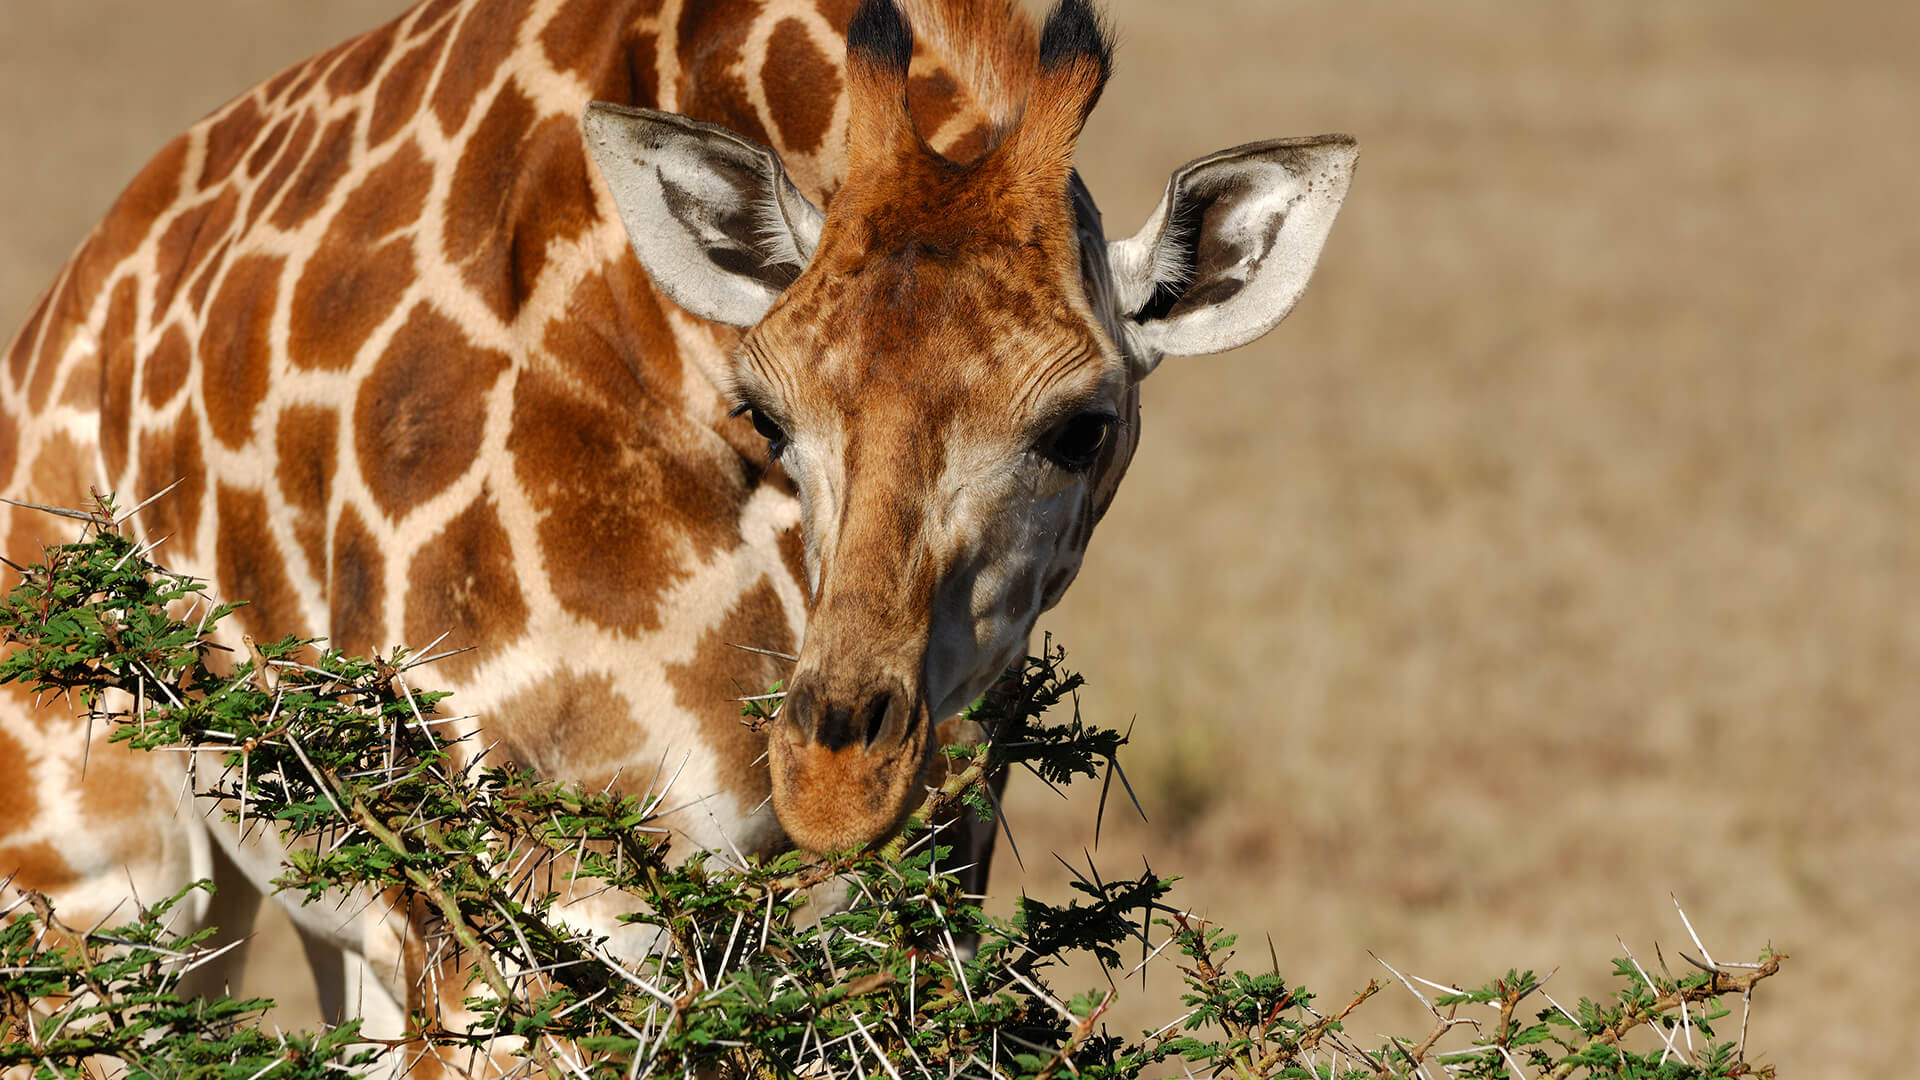 A giraffe dines on some thorny acacia leaves in Africa